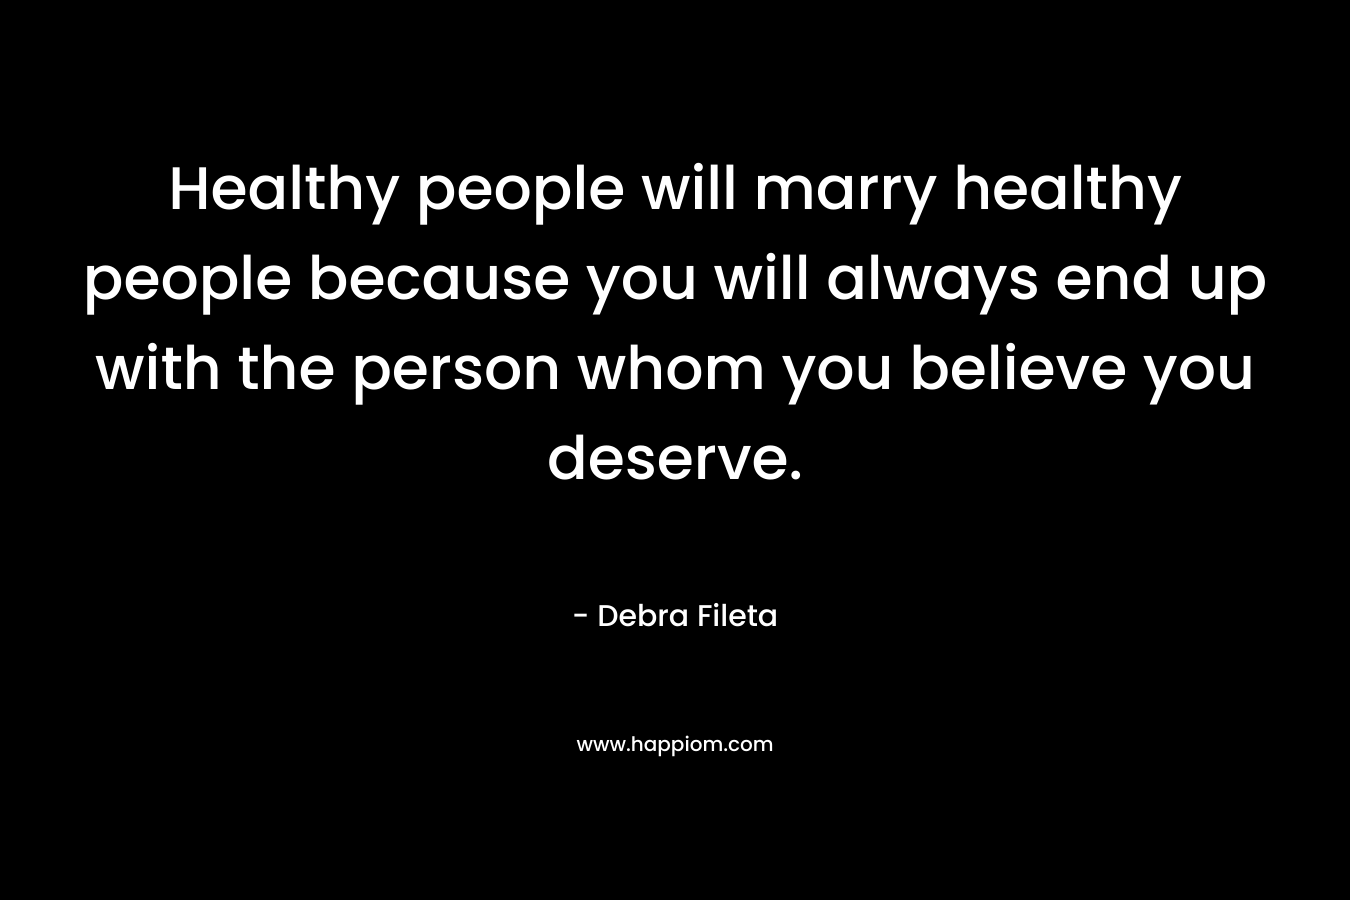 Healthy people will marry healthy people because you will always end up with the person whom you believe you deserve. – Debra Fileta